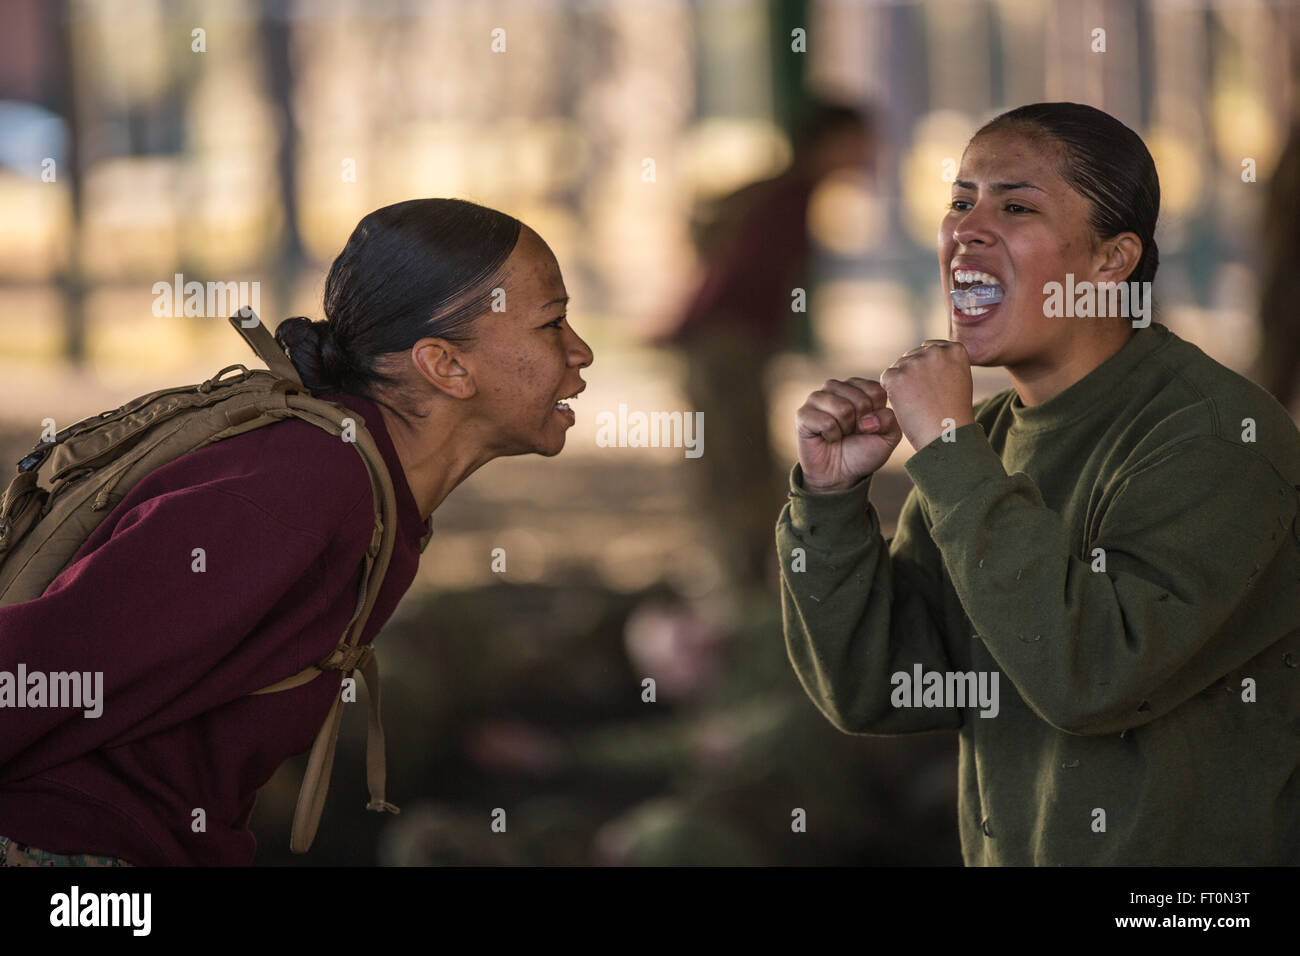 U.S. Marine Corps Sgt. Natalia Arenas, a drill instructor with Platoon 4017, November Company, 4th Recruit Training Battalion, Recruit Training Regiment, instructs a recruit on a technique from the Marine Corps Martial Arts Program at Leatherneck Square, Marine Corps Recruit Depot Parris Island, S.C. March 3, 2016. The Marine Corps Martial Arts Program combines some of the most effective unarmed techniques from various martial arts with armed techniques designed for combat, with the motto one mind, any weapon.  (U.S. Marine Corps photo by Sgt. Nathan McKitrick/Released) Stock Photo